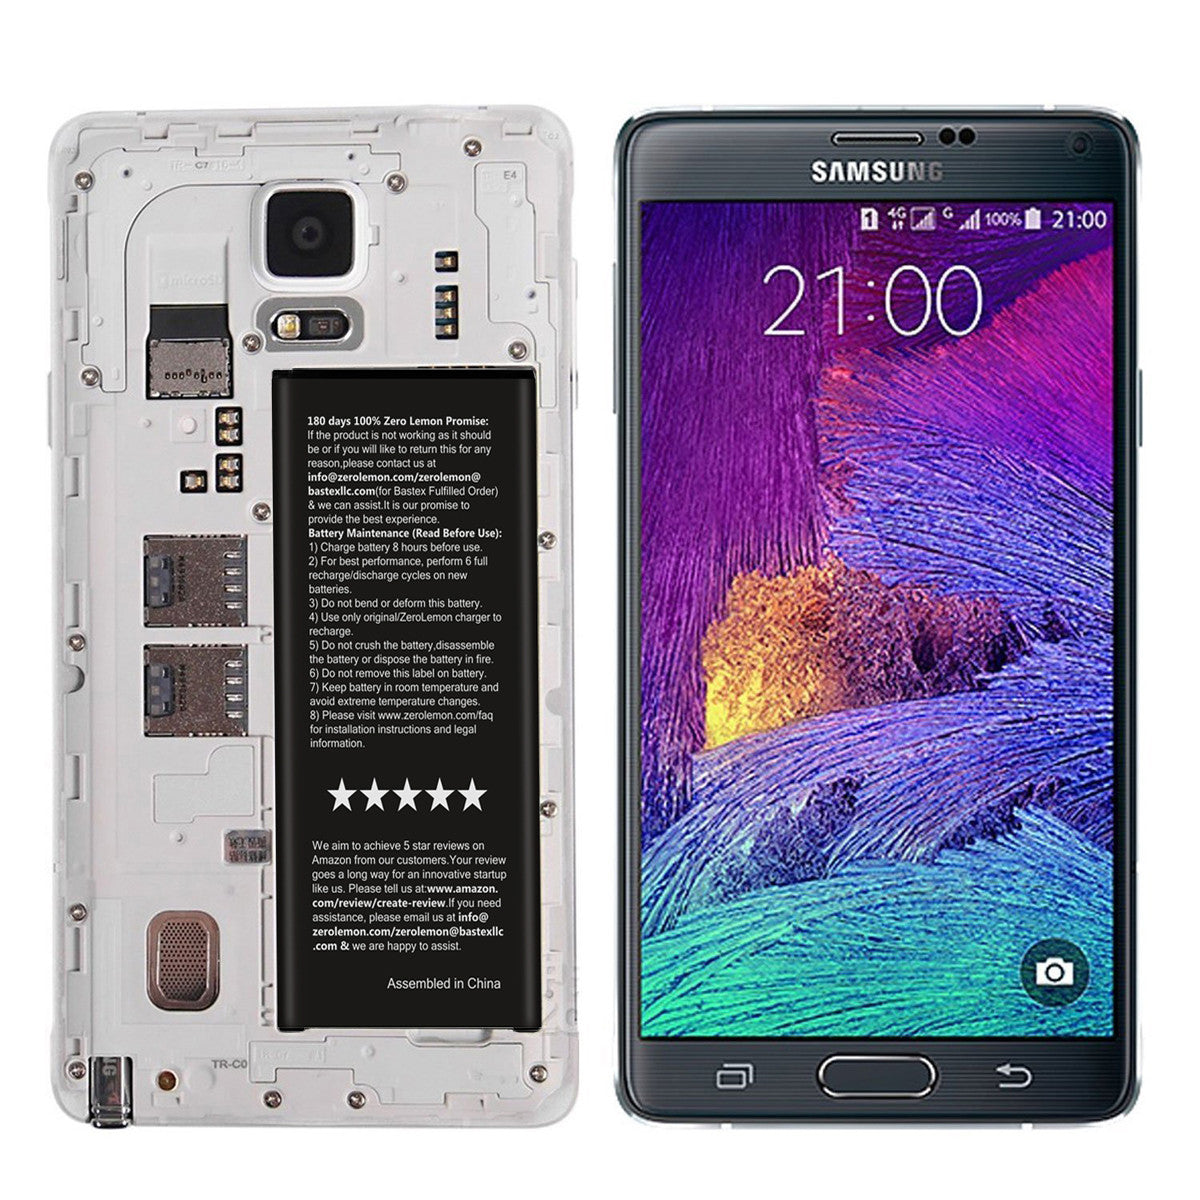 Галакси нот 4. Samsung Note 4. Самсунг Galaxy Note 4. Samsung Note 4 Pro. Samsung Galaxy z Note 4.